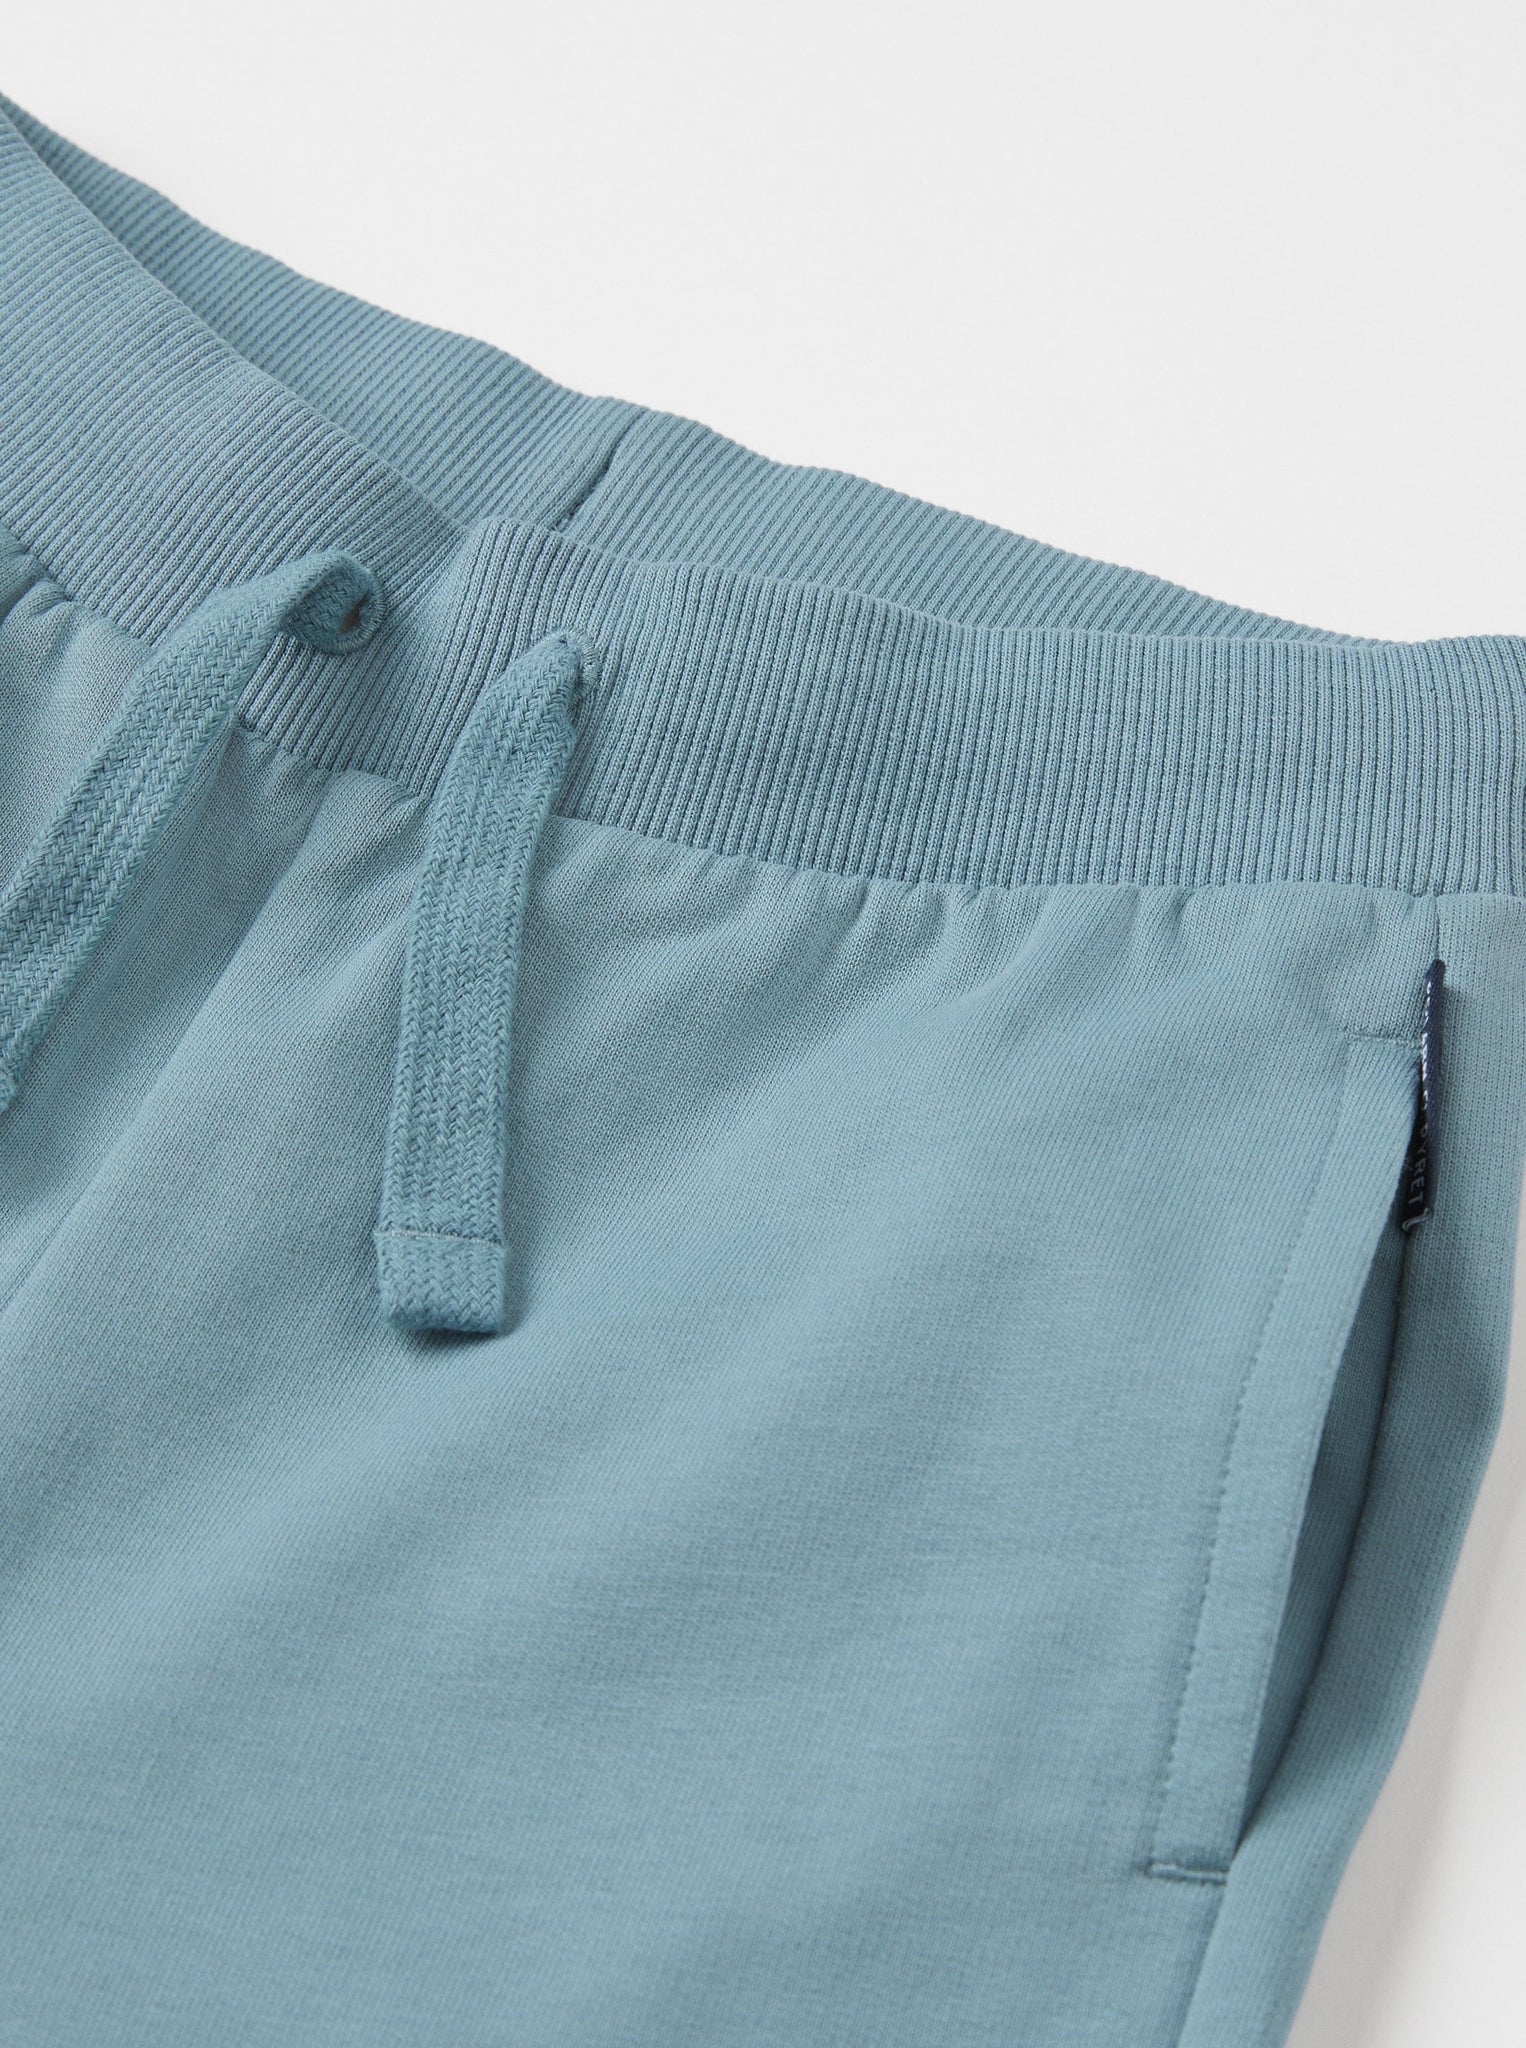 Organic Cotton Blue Kids Joggers from the Polarn O. Pyret kidswear collection. Nordic kids clothes made from sustainable sources.